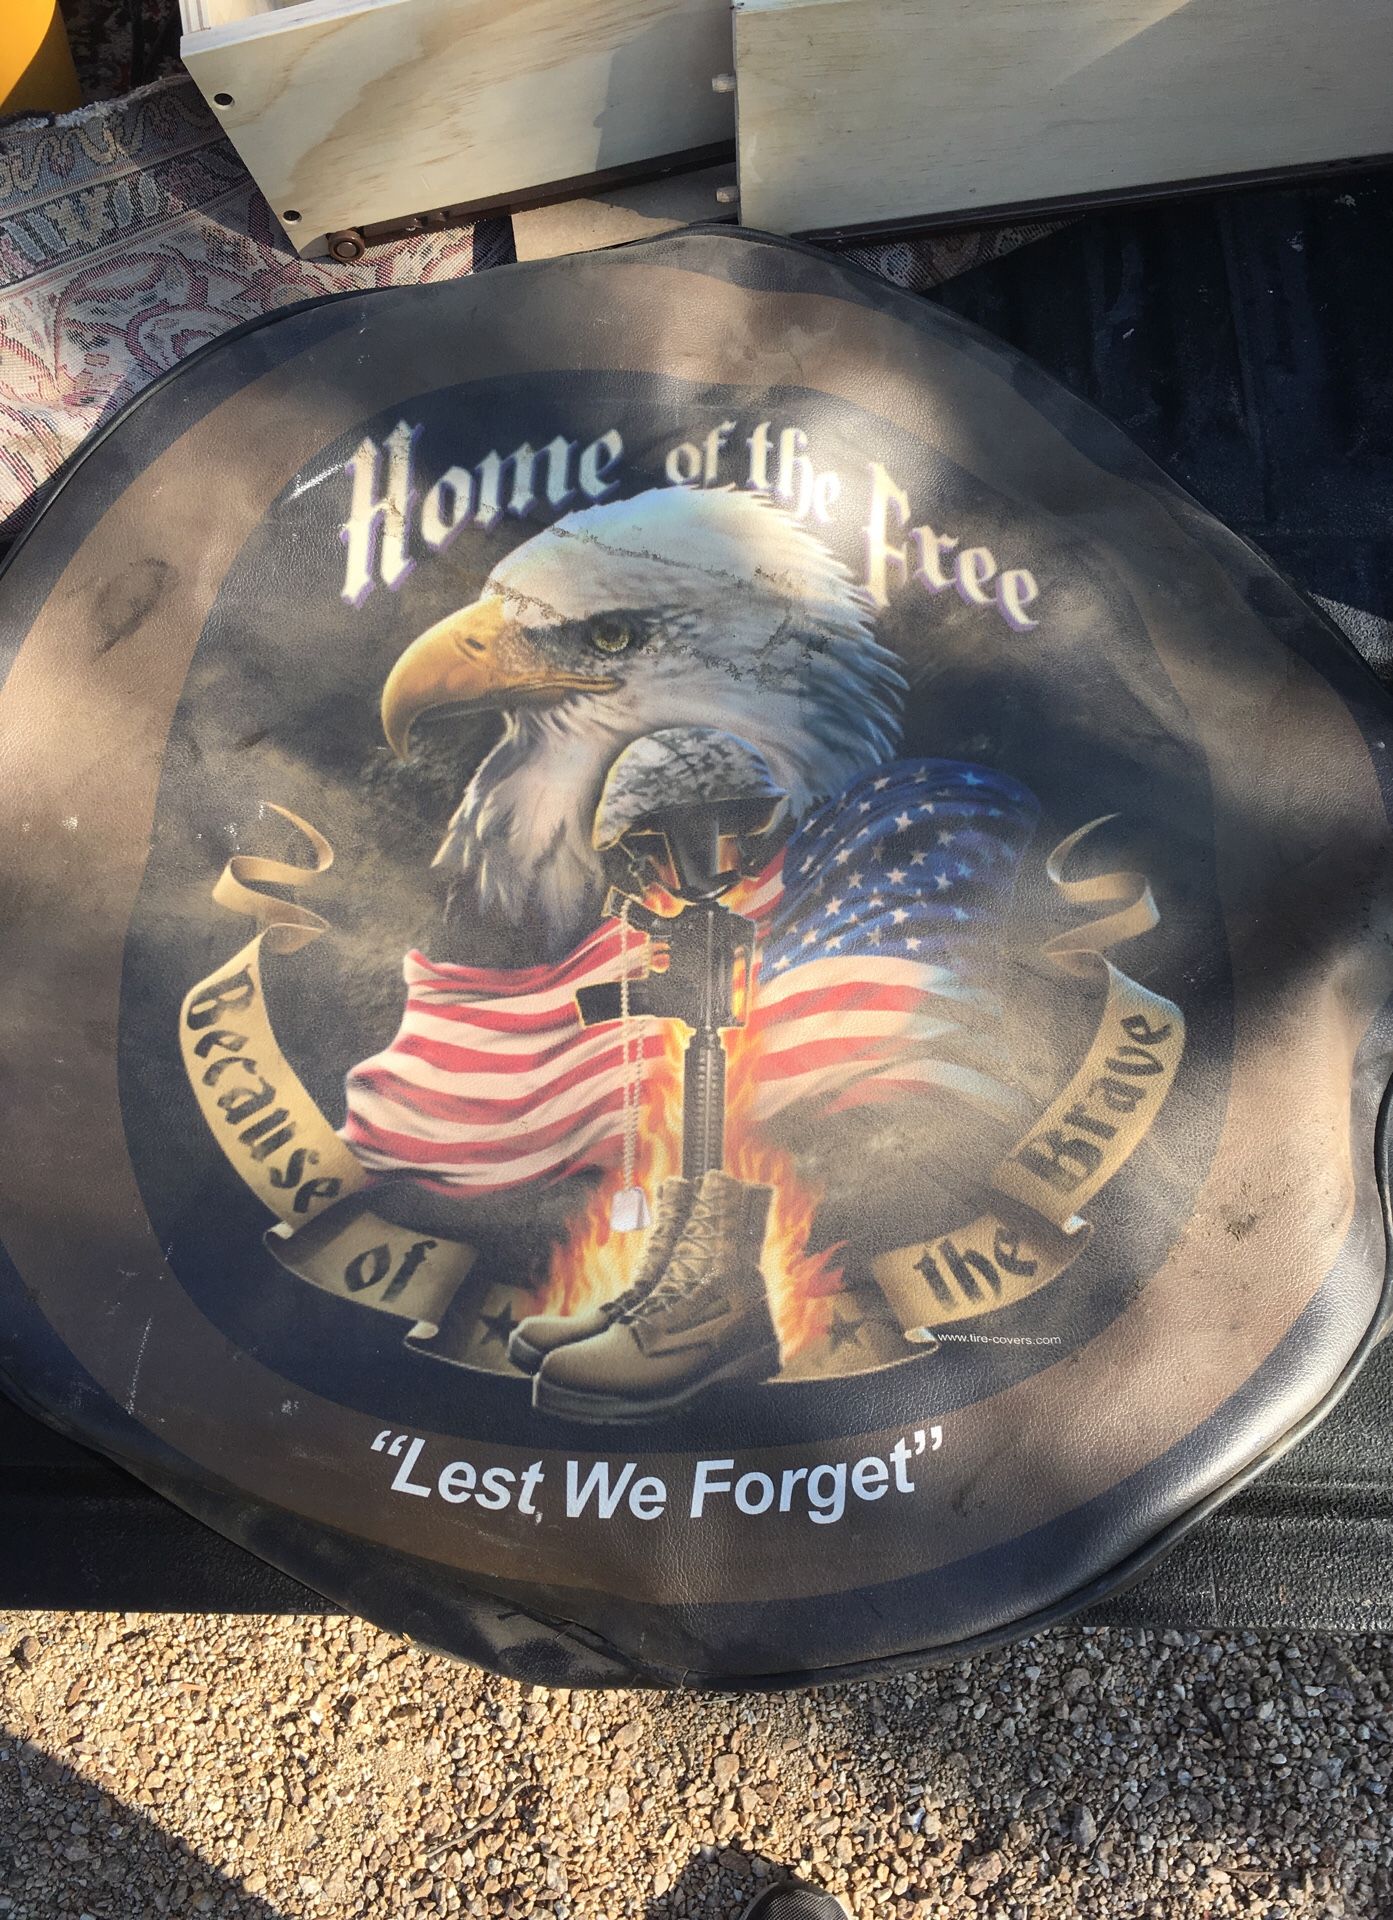 🇺🇸🇺🇸 Spare tire cover that represents freedom and honor those who were lost to save us🇺🇸🇺🇸